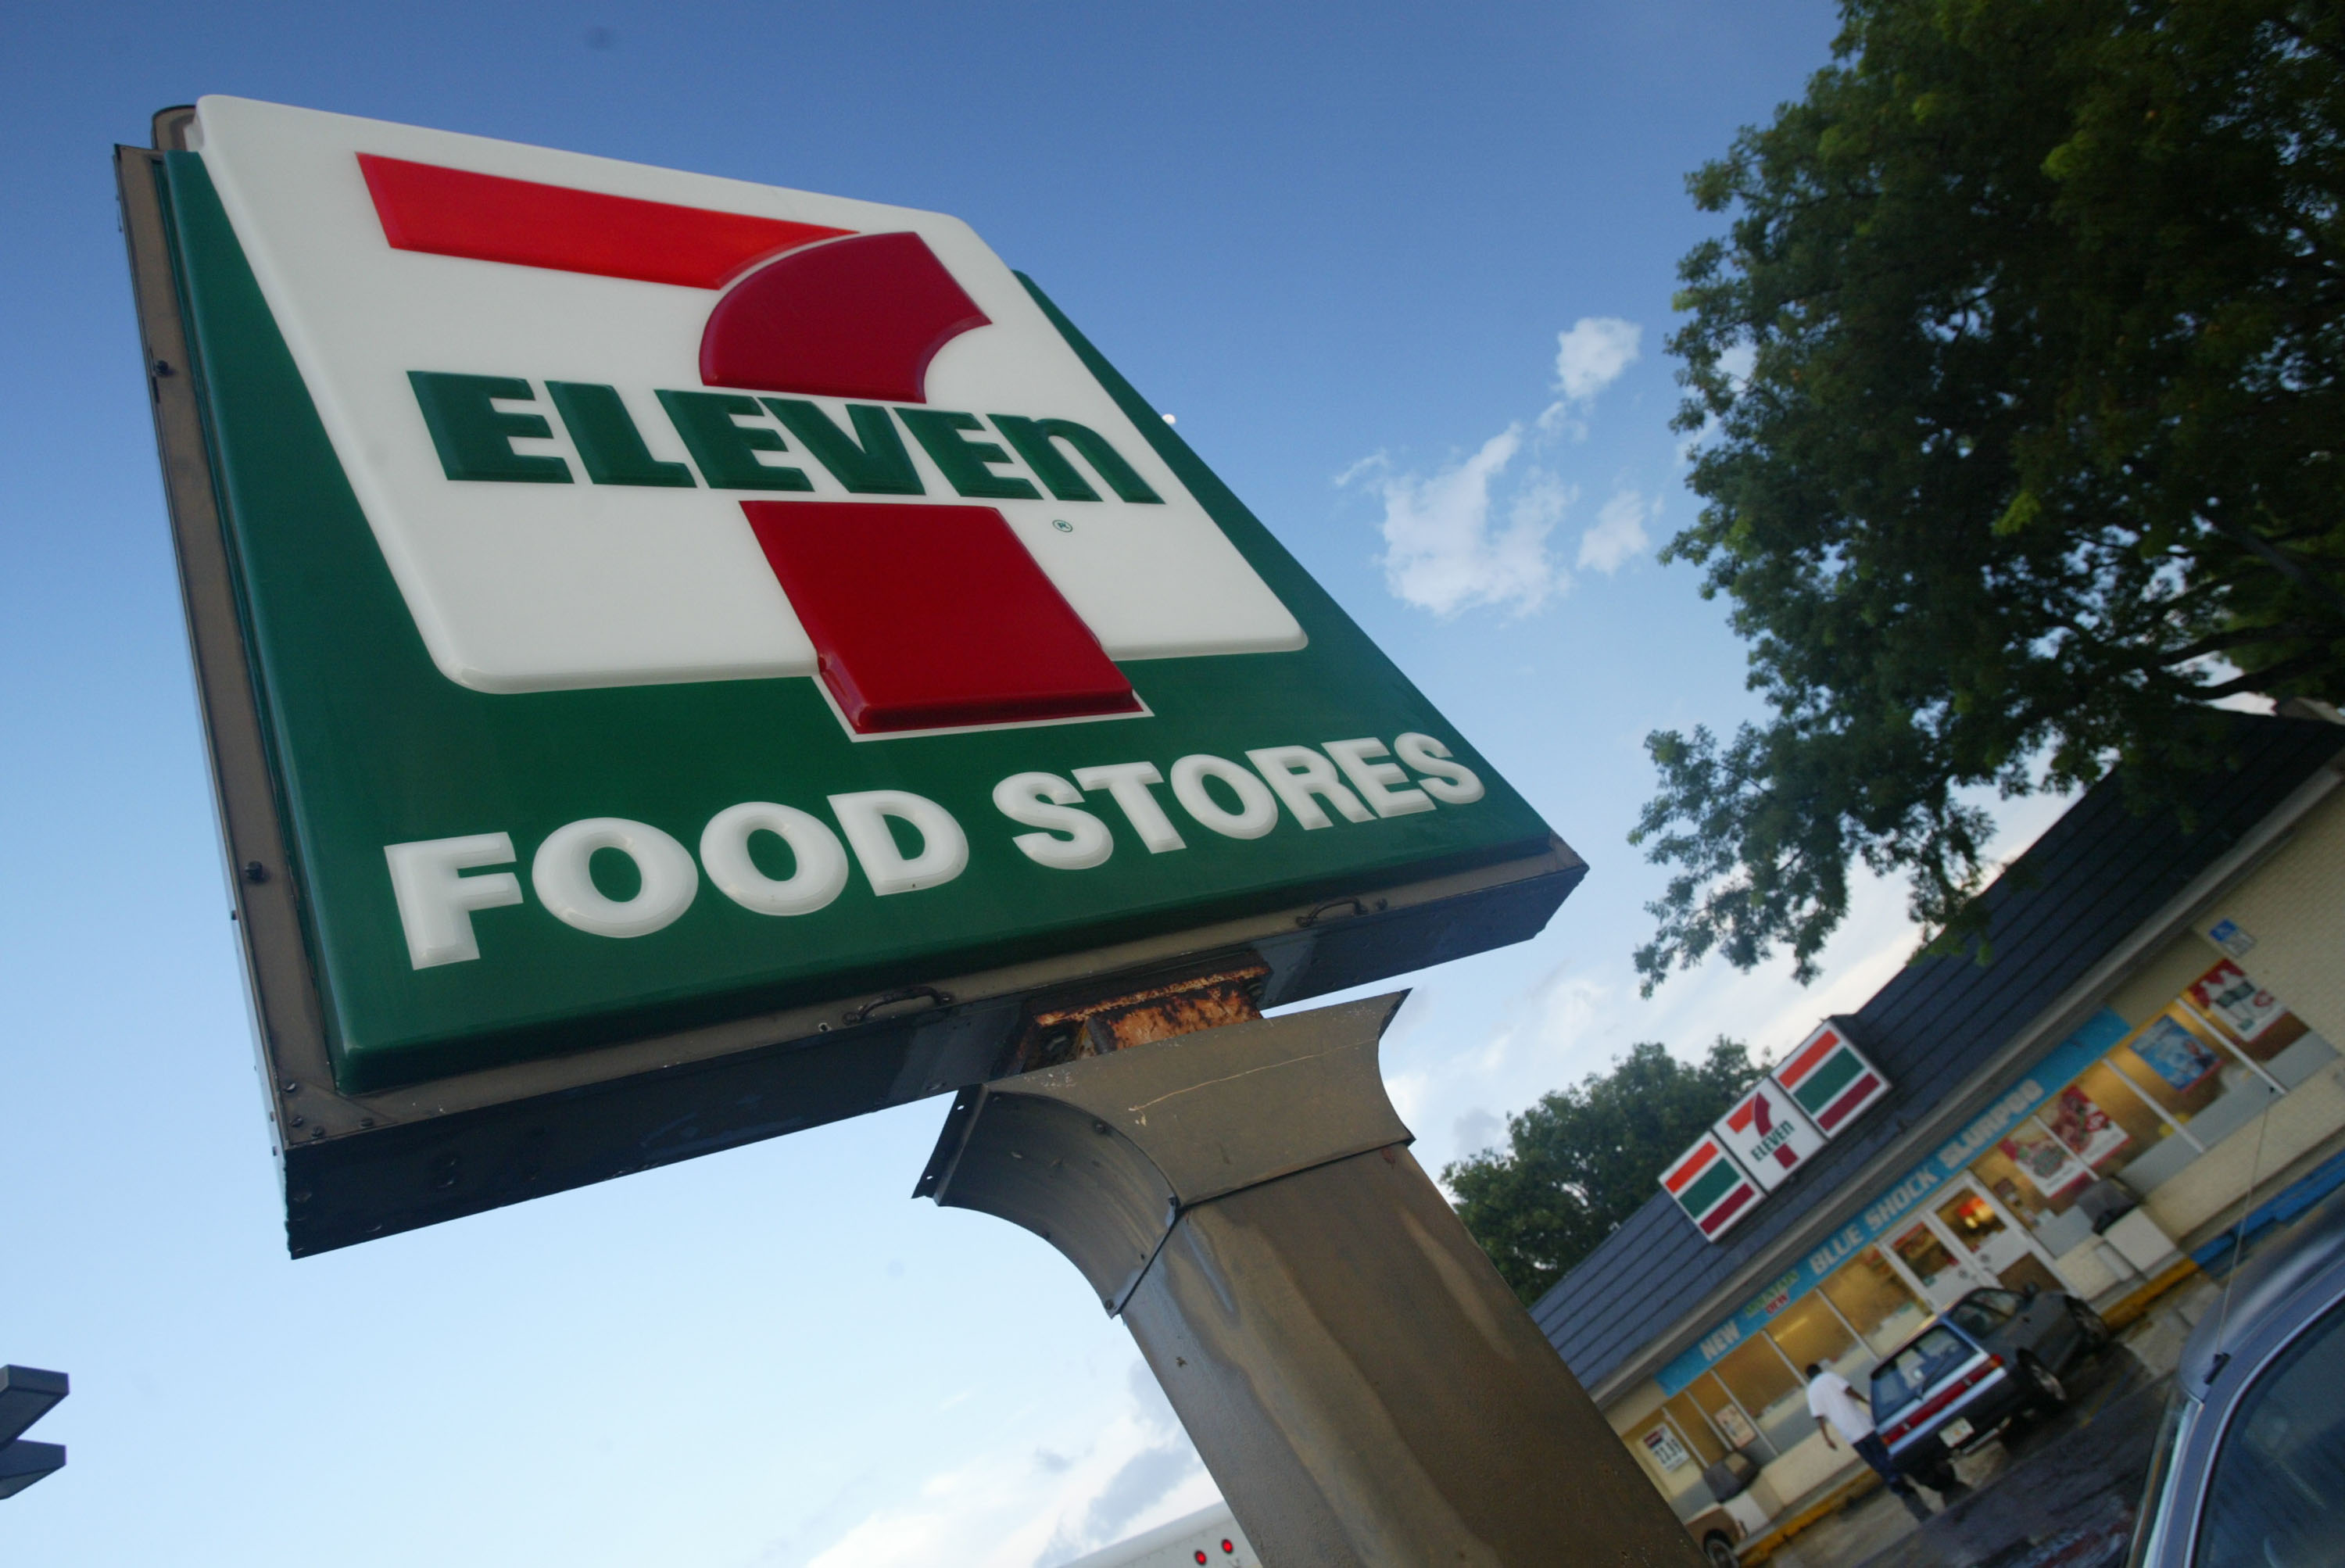 A 7-Eleven store in Florida